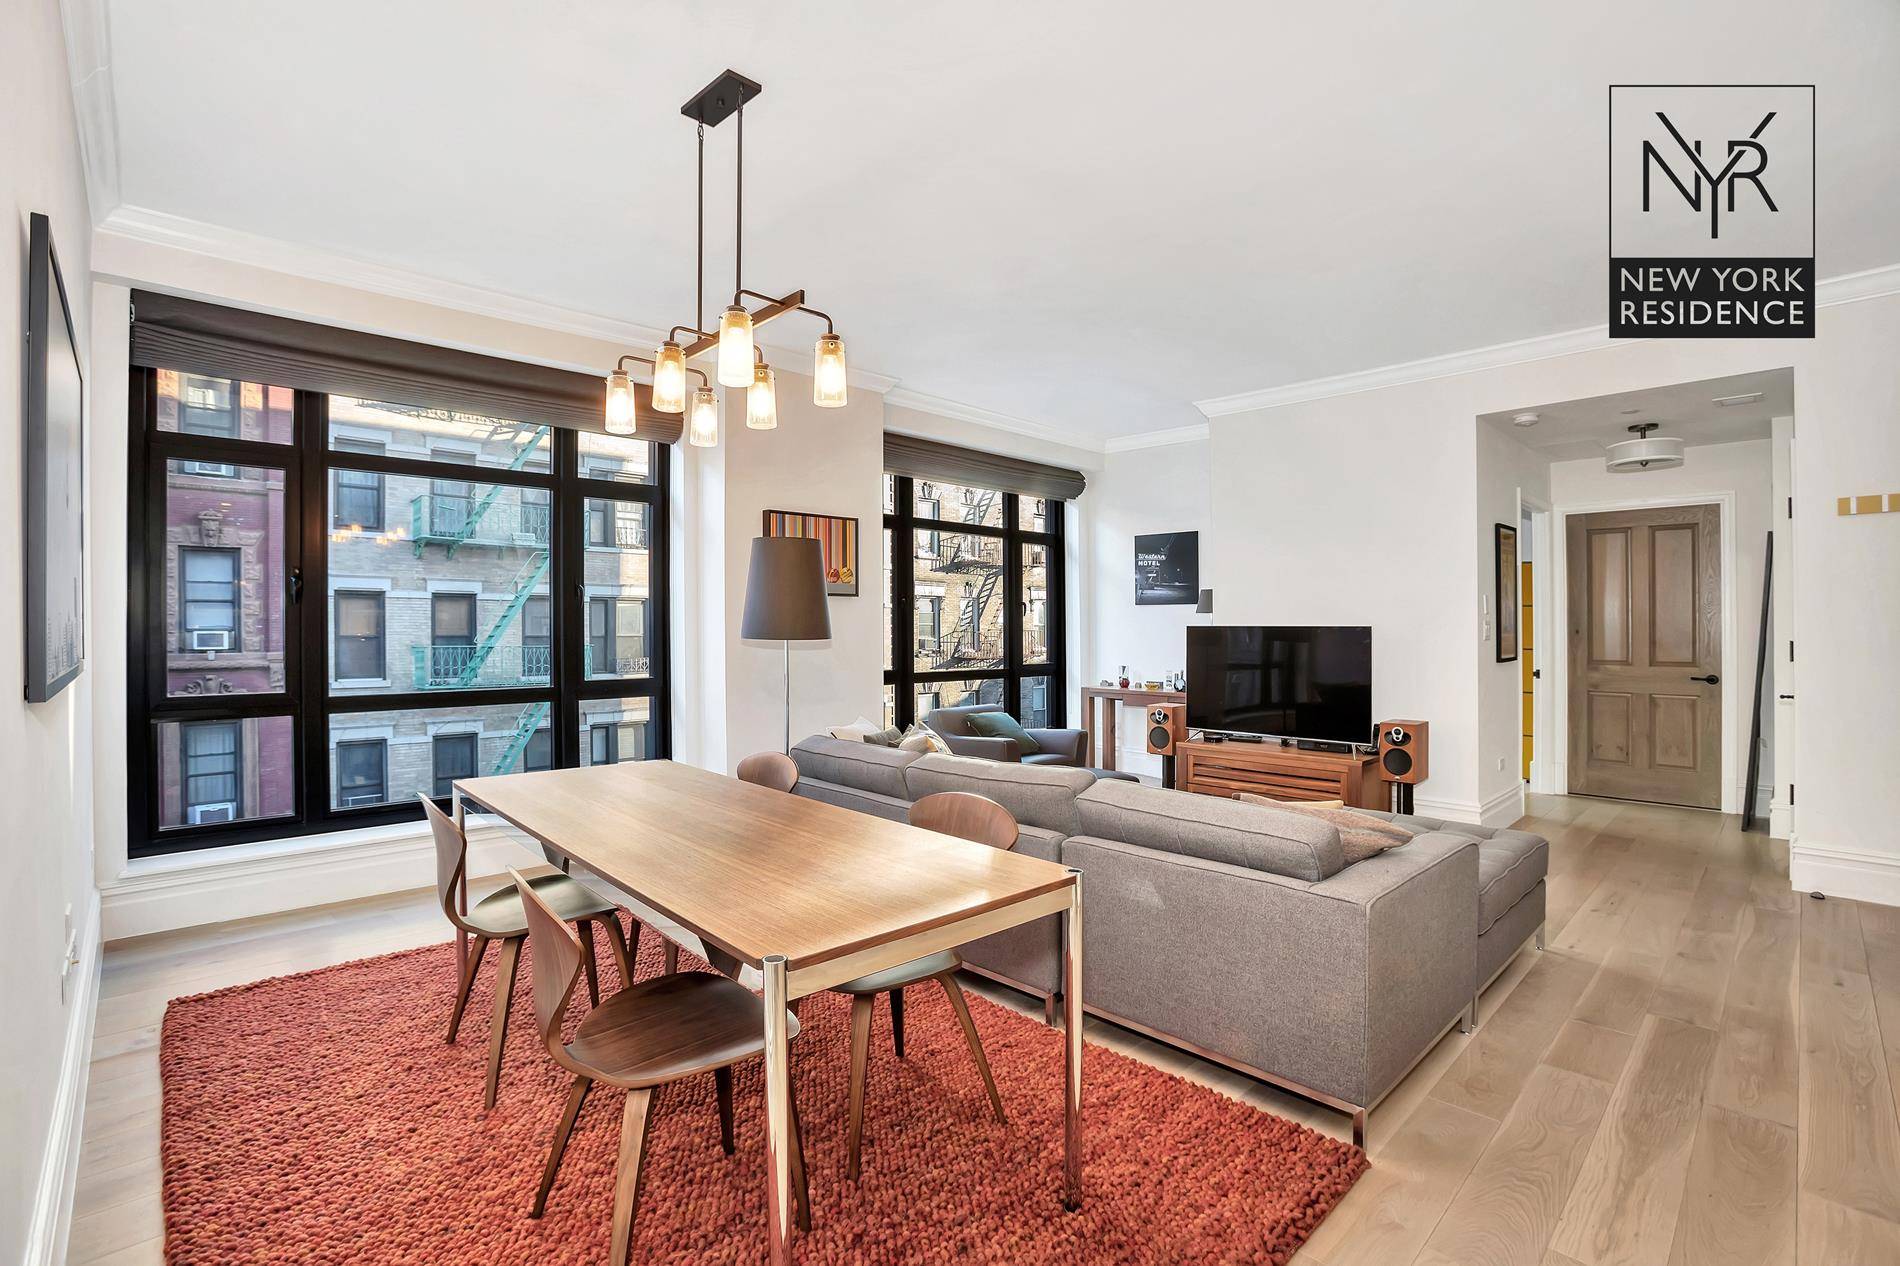 199 Mott Street is a modern boutique condominium with 11 apartments, 24 hour doorman amp ; concierge, secure keyed elevator access, and a stunning rooftop with lovely views in all ...